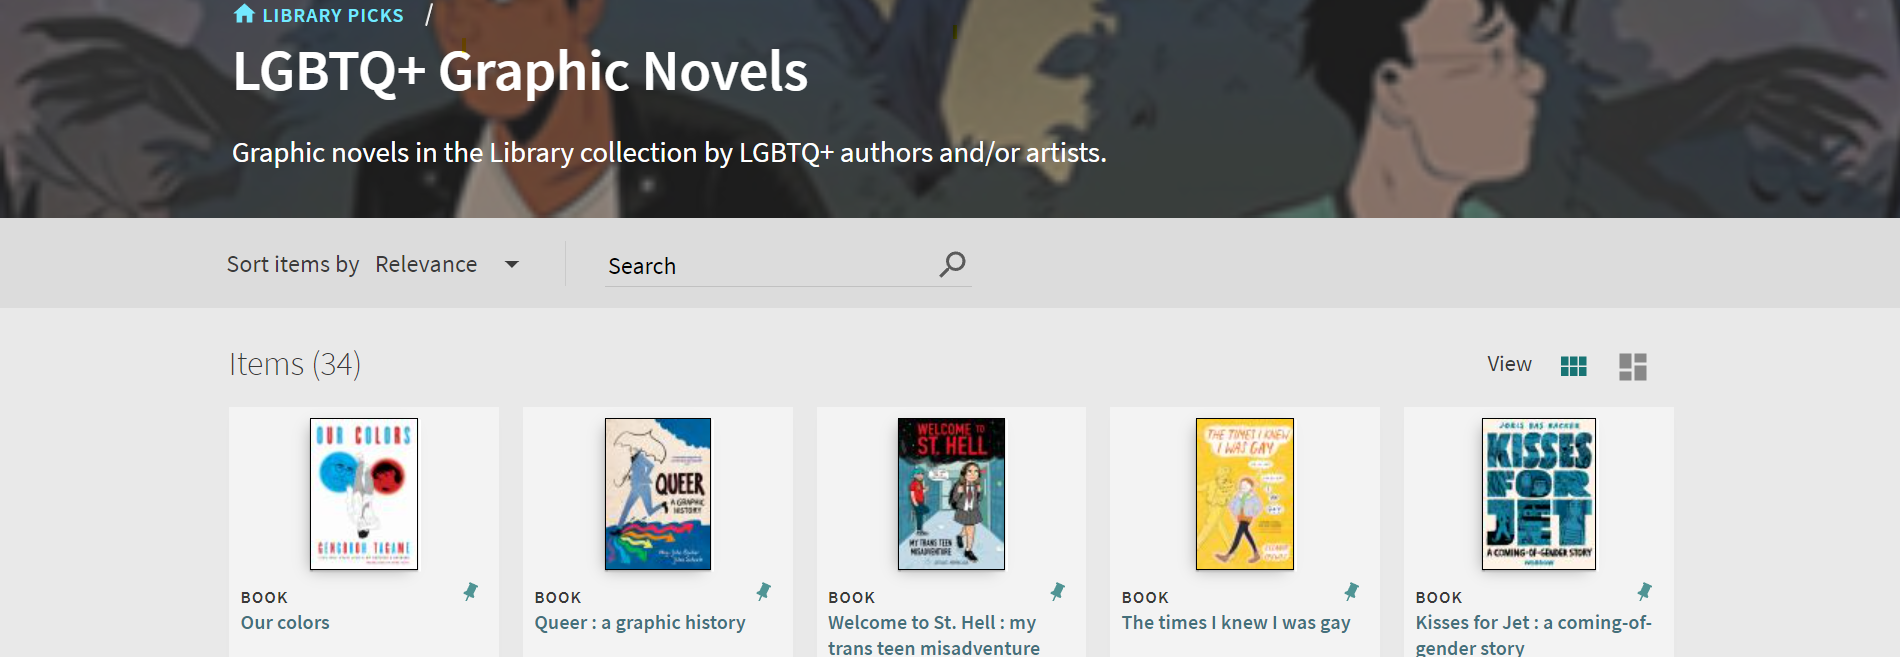 Virtual book display of LGBTQ plus graphic novels. Titles: Our colors, Queen: a graphic novel; Welcome to St. Hell: My trans teen misadventures, the times I knew I w as gay